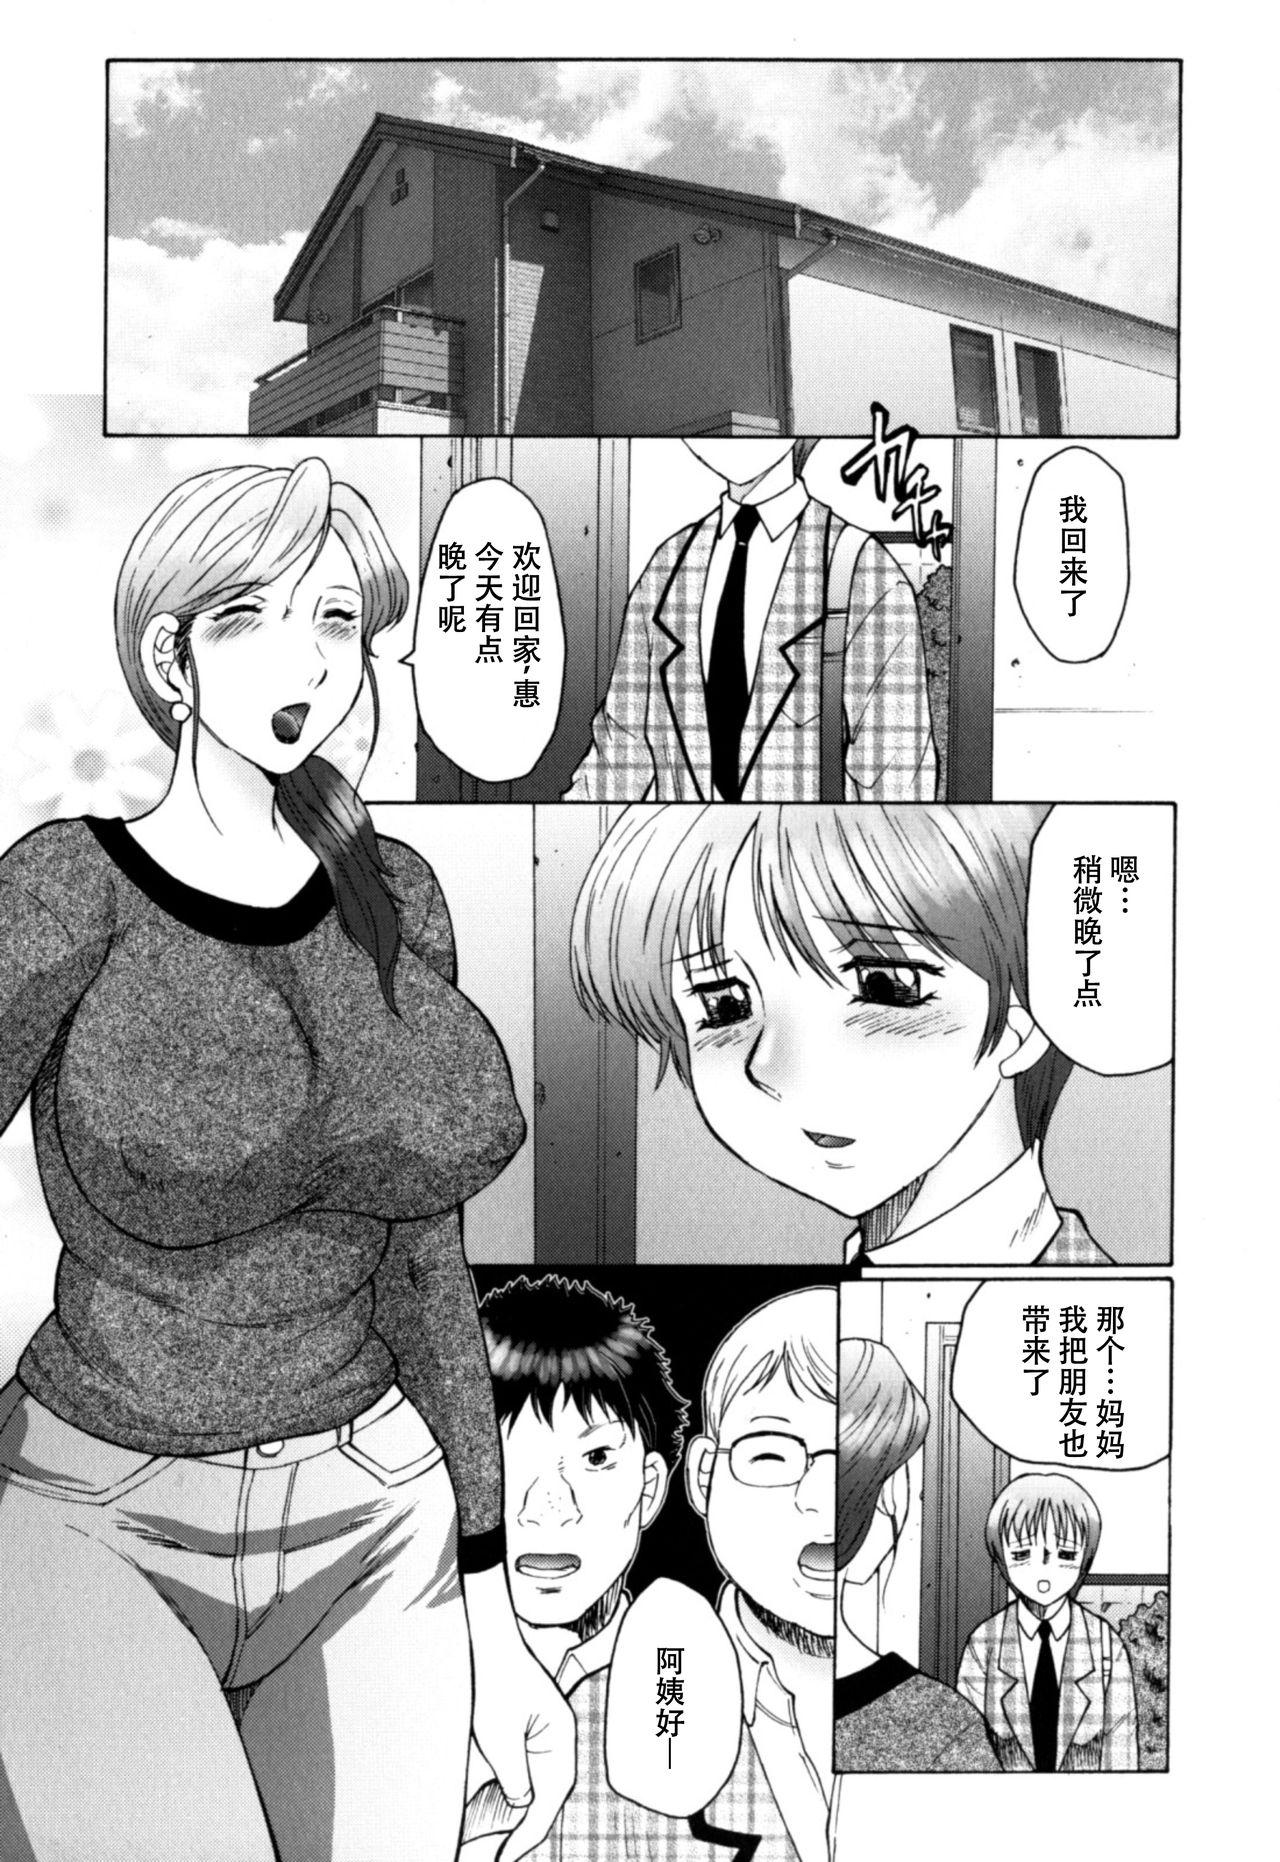 Assfingering [Fuusen Club] Haha Mamire Ch. 1 [Chinese]【不可视汉化】 Camsex - Page 4